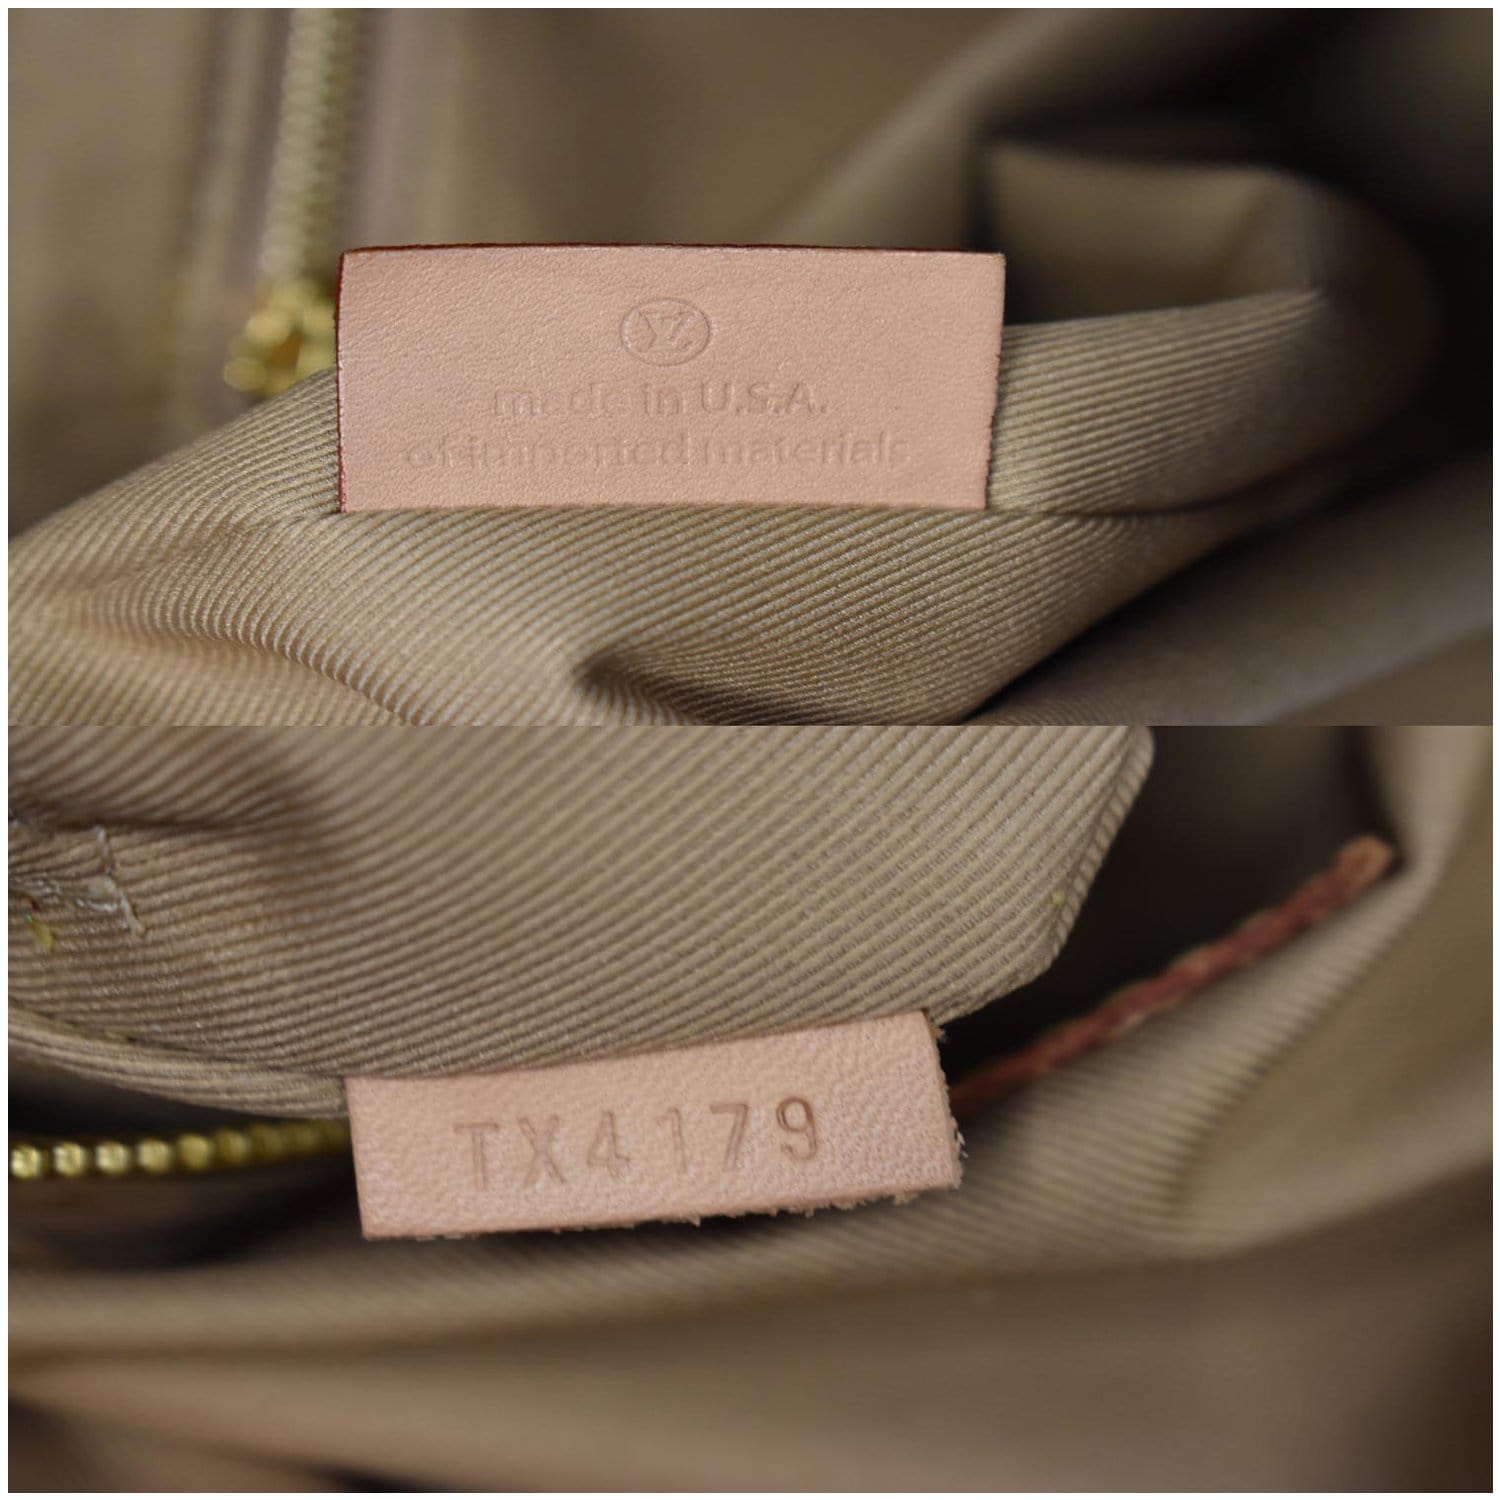 Louis Vuitton, Bags, Louis Vuitton Authentic Used Date Code Inside